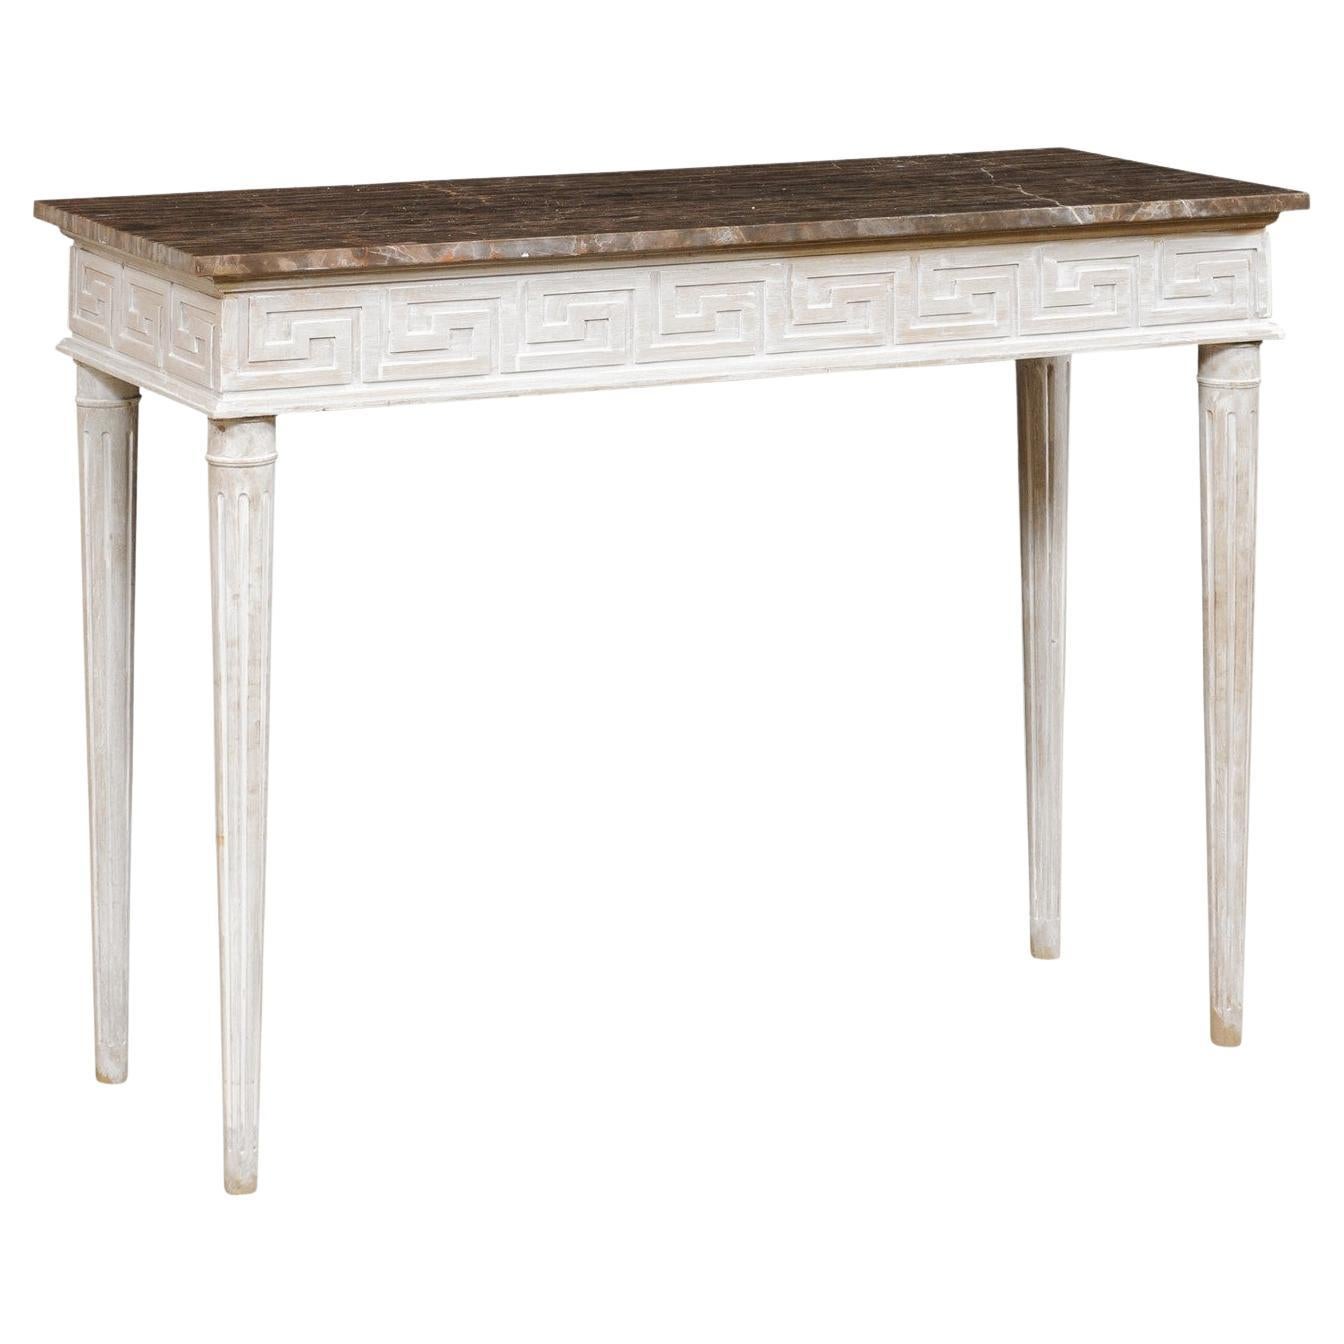 Marble Top Console Table with Greek Key Motif Carved Skirt on All Sides